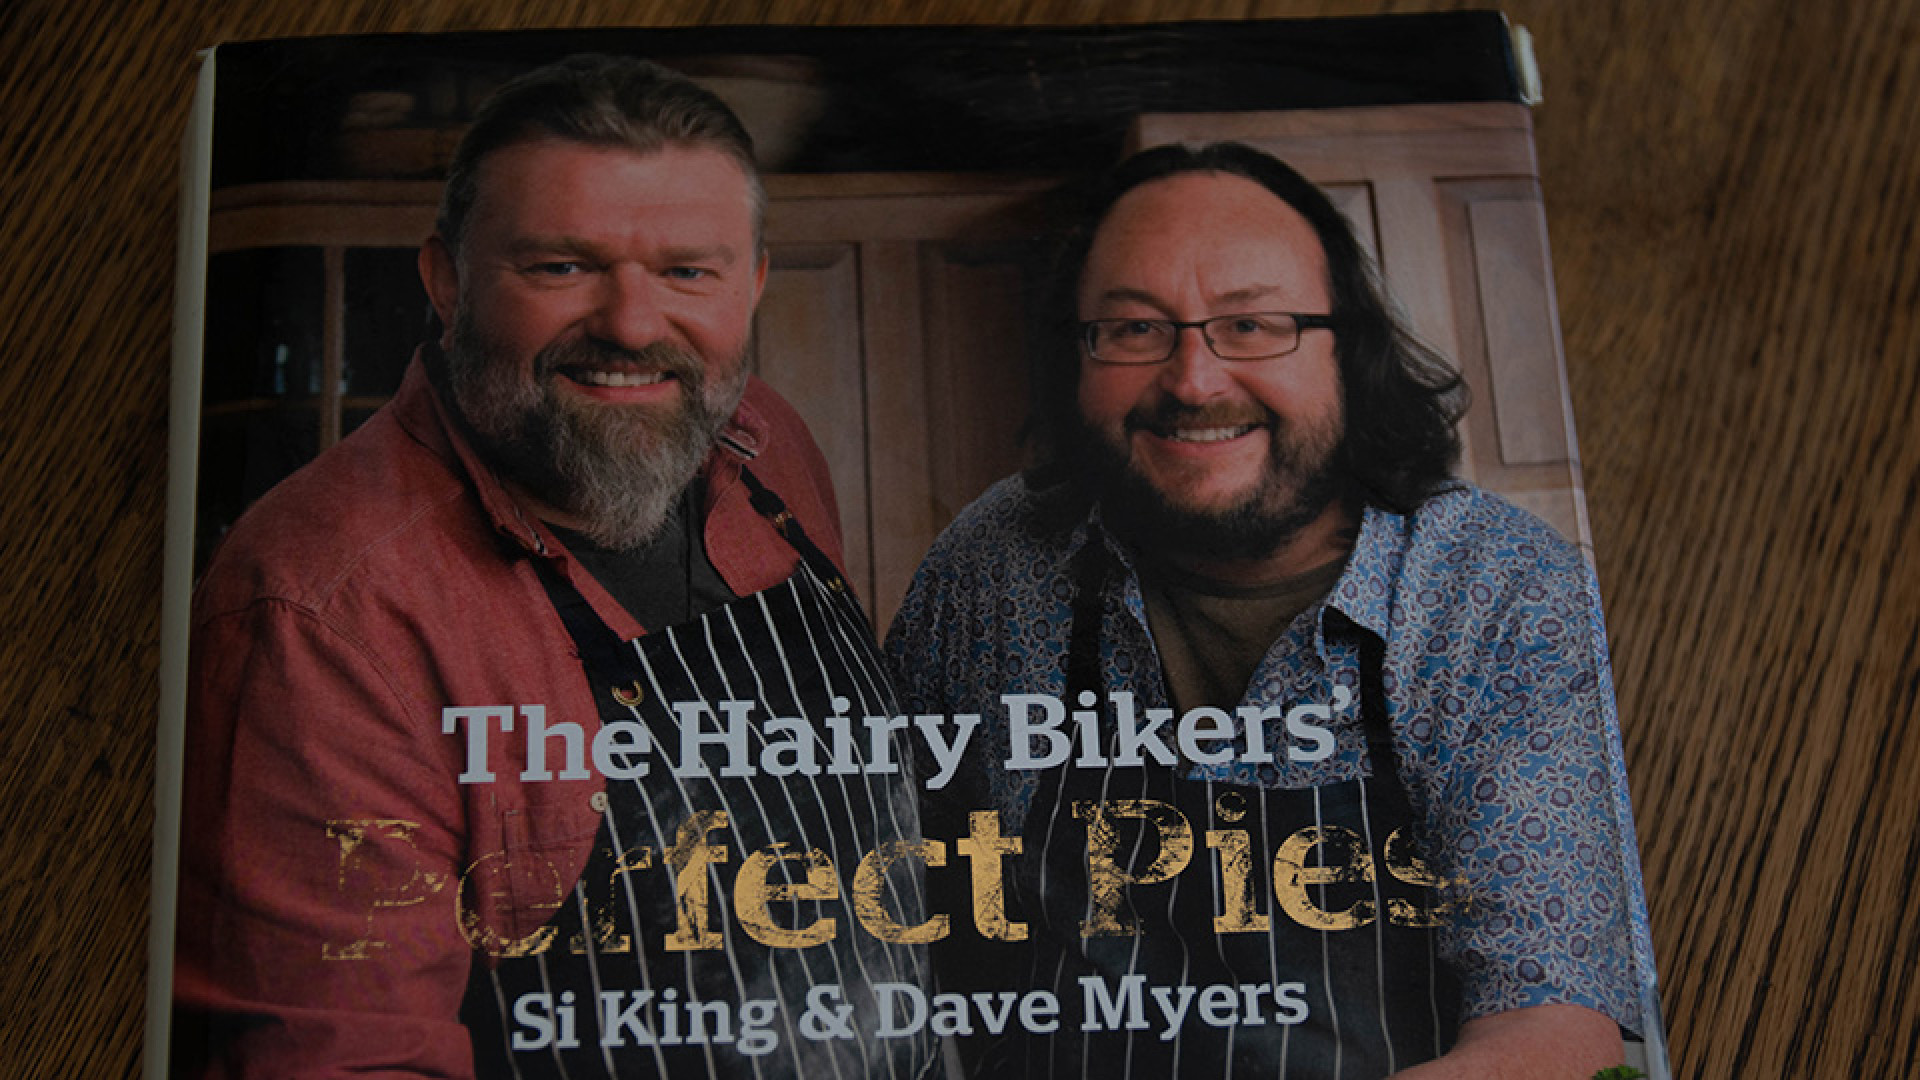 https://www.raceleathers.co.uk/image/cache/catalog/Blog%20Images/Memorial%20Ride%20Out%20For%20Dave%20Myer%20Of%20The%20Hairy%20Bikers%202024-1920x1080.jpg